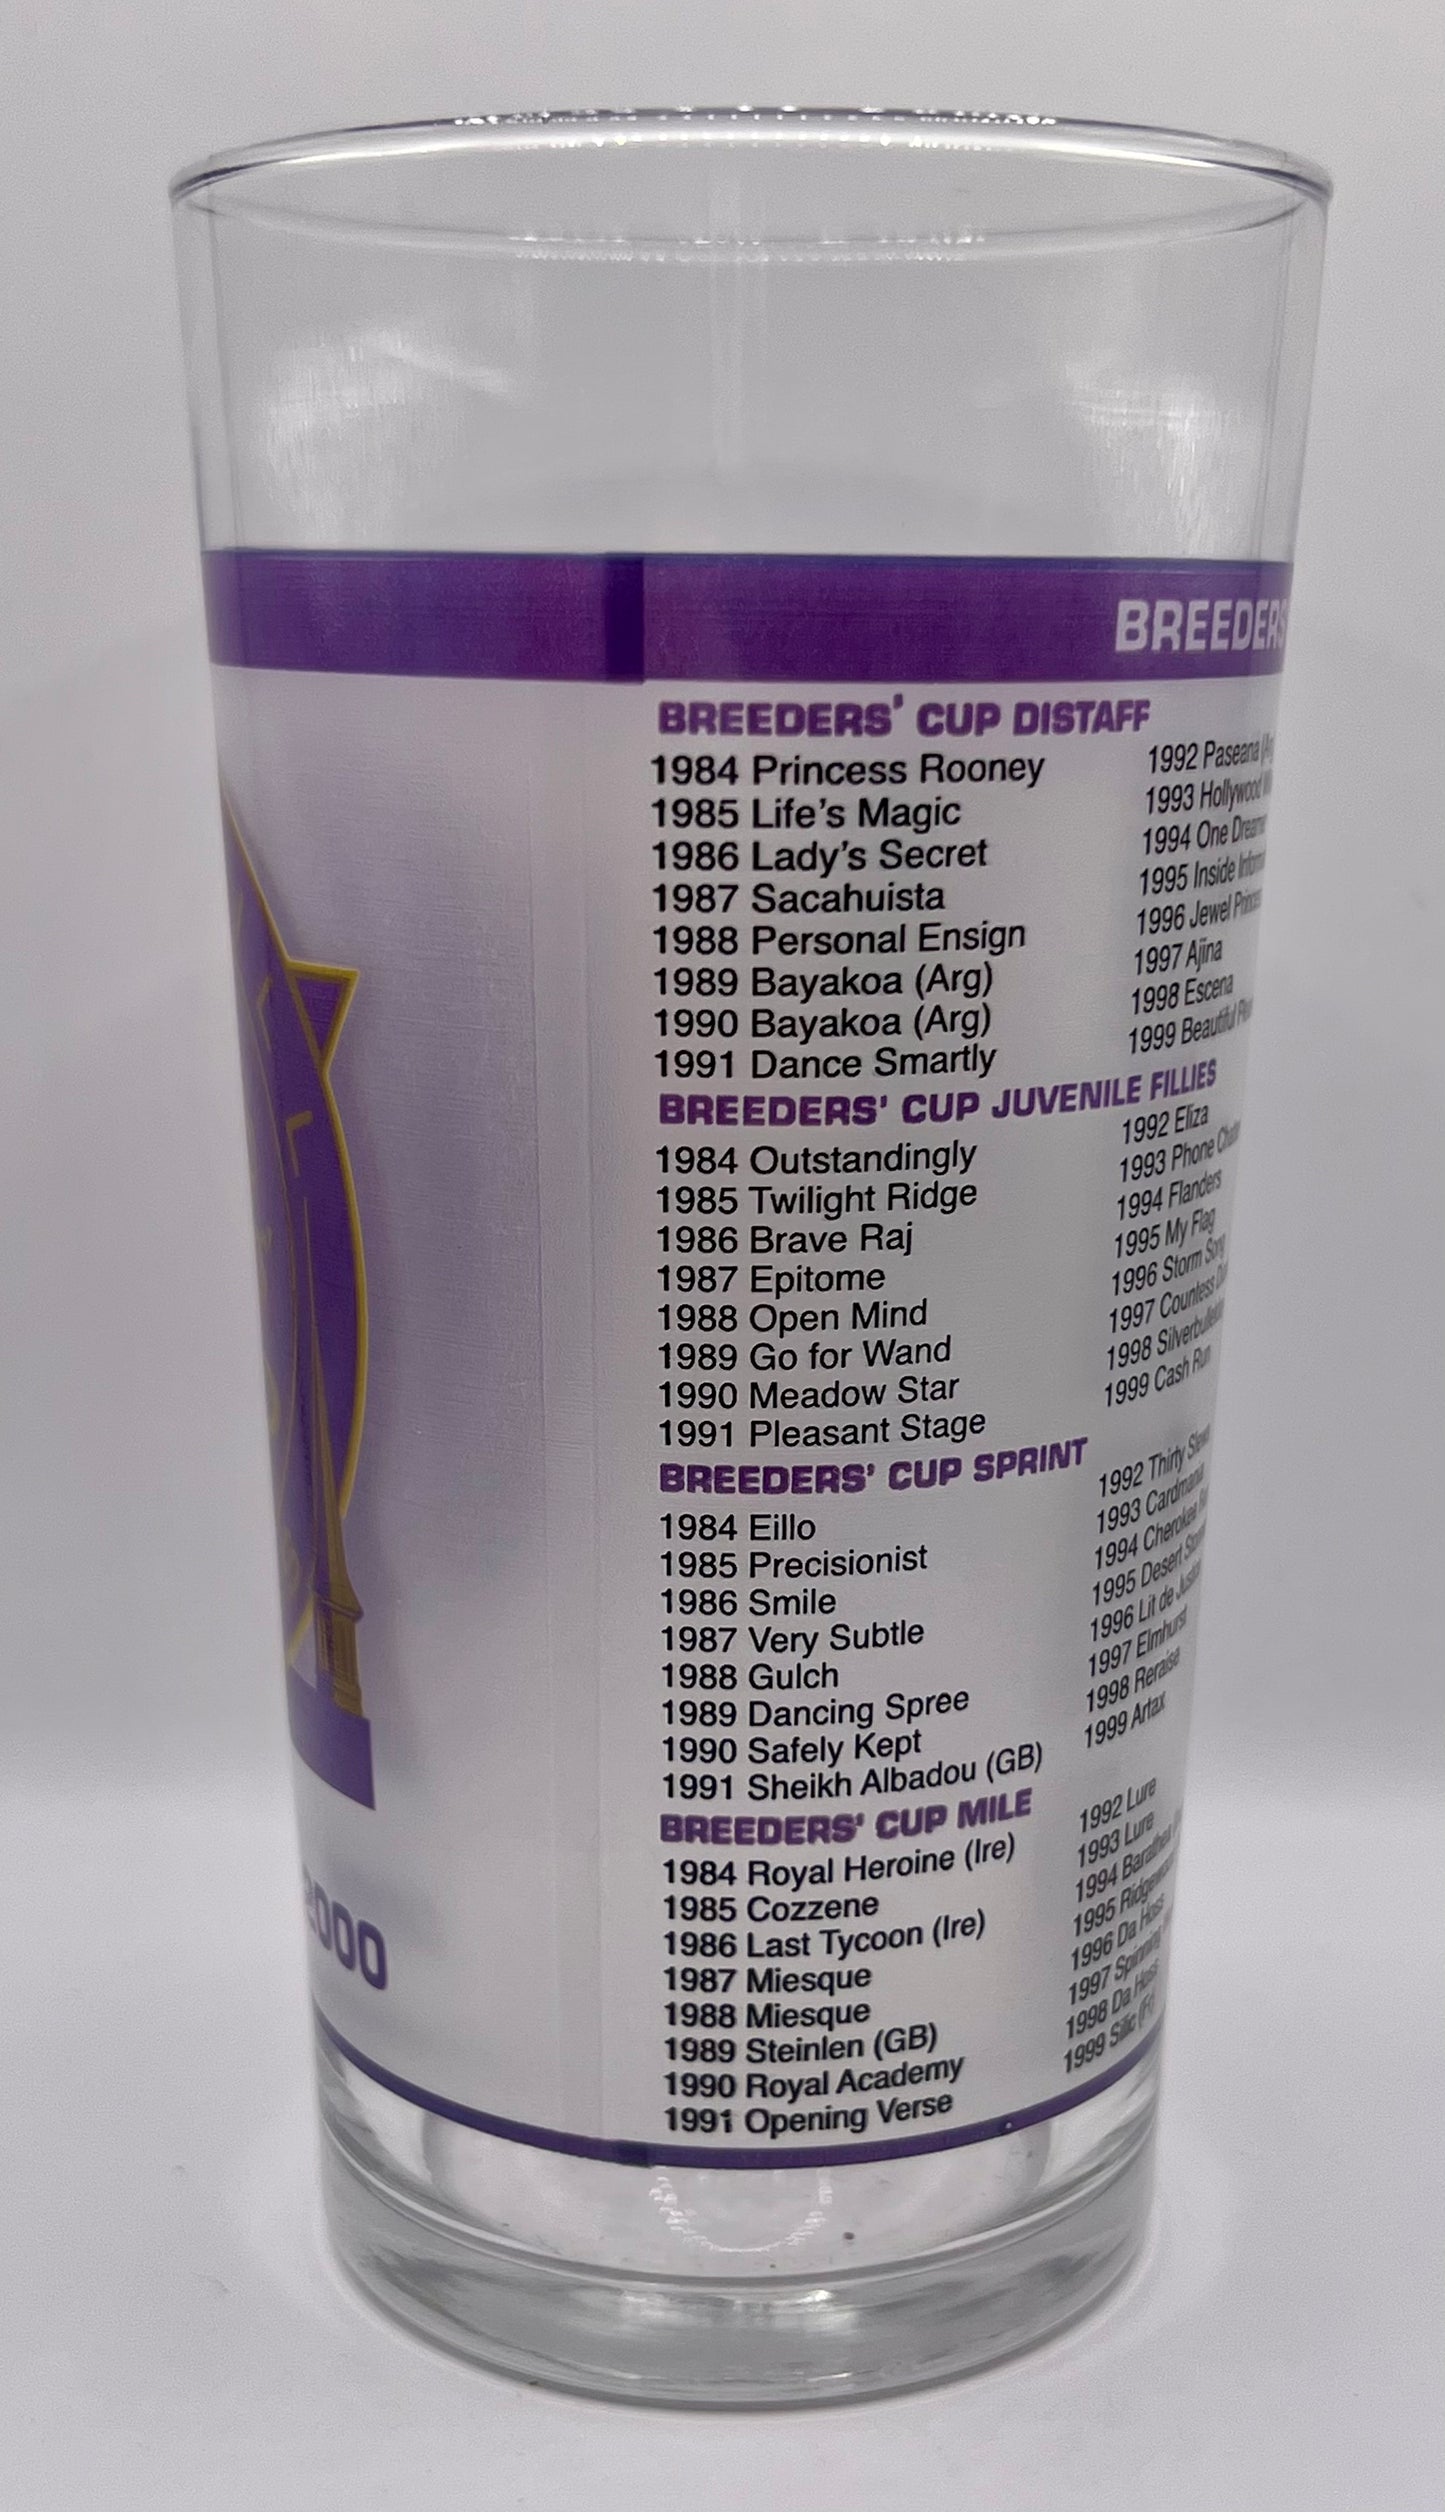 2000 Breeders' Cup Glass